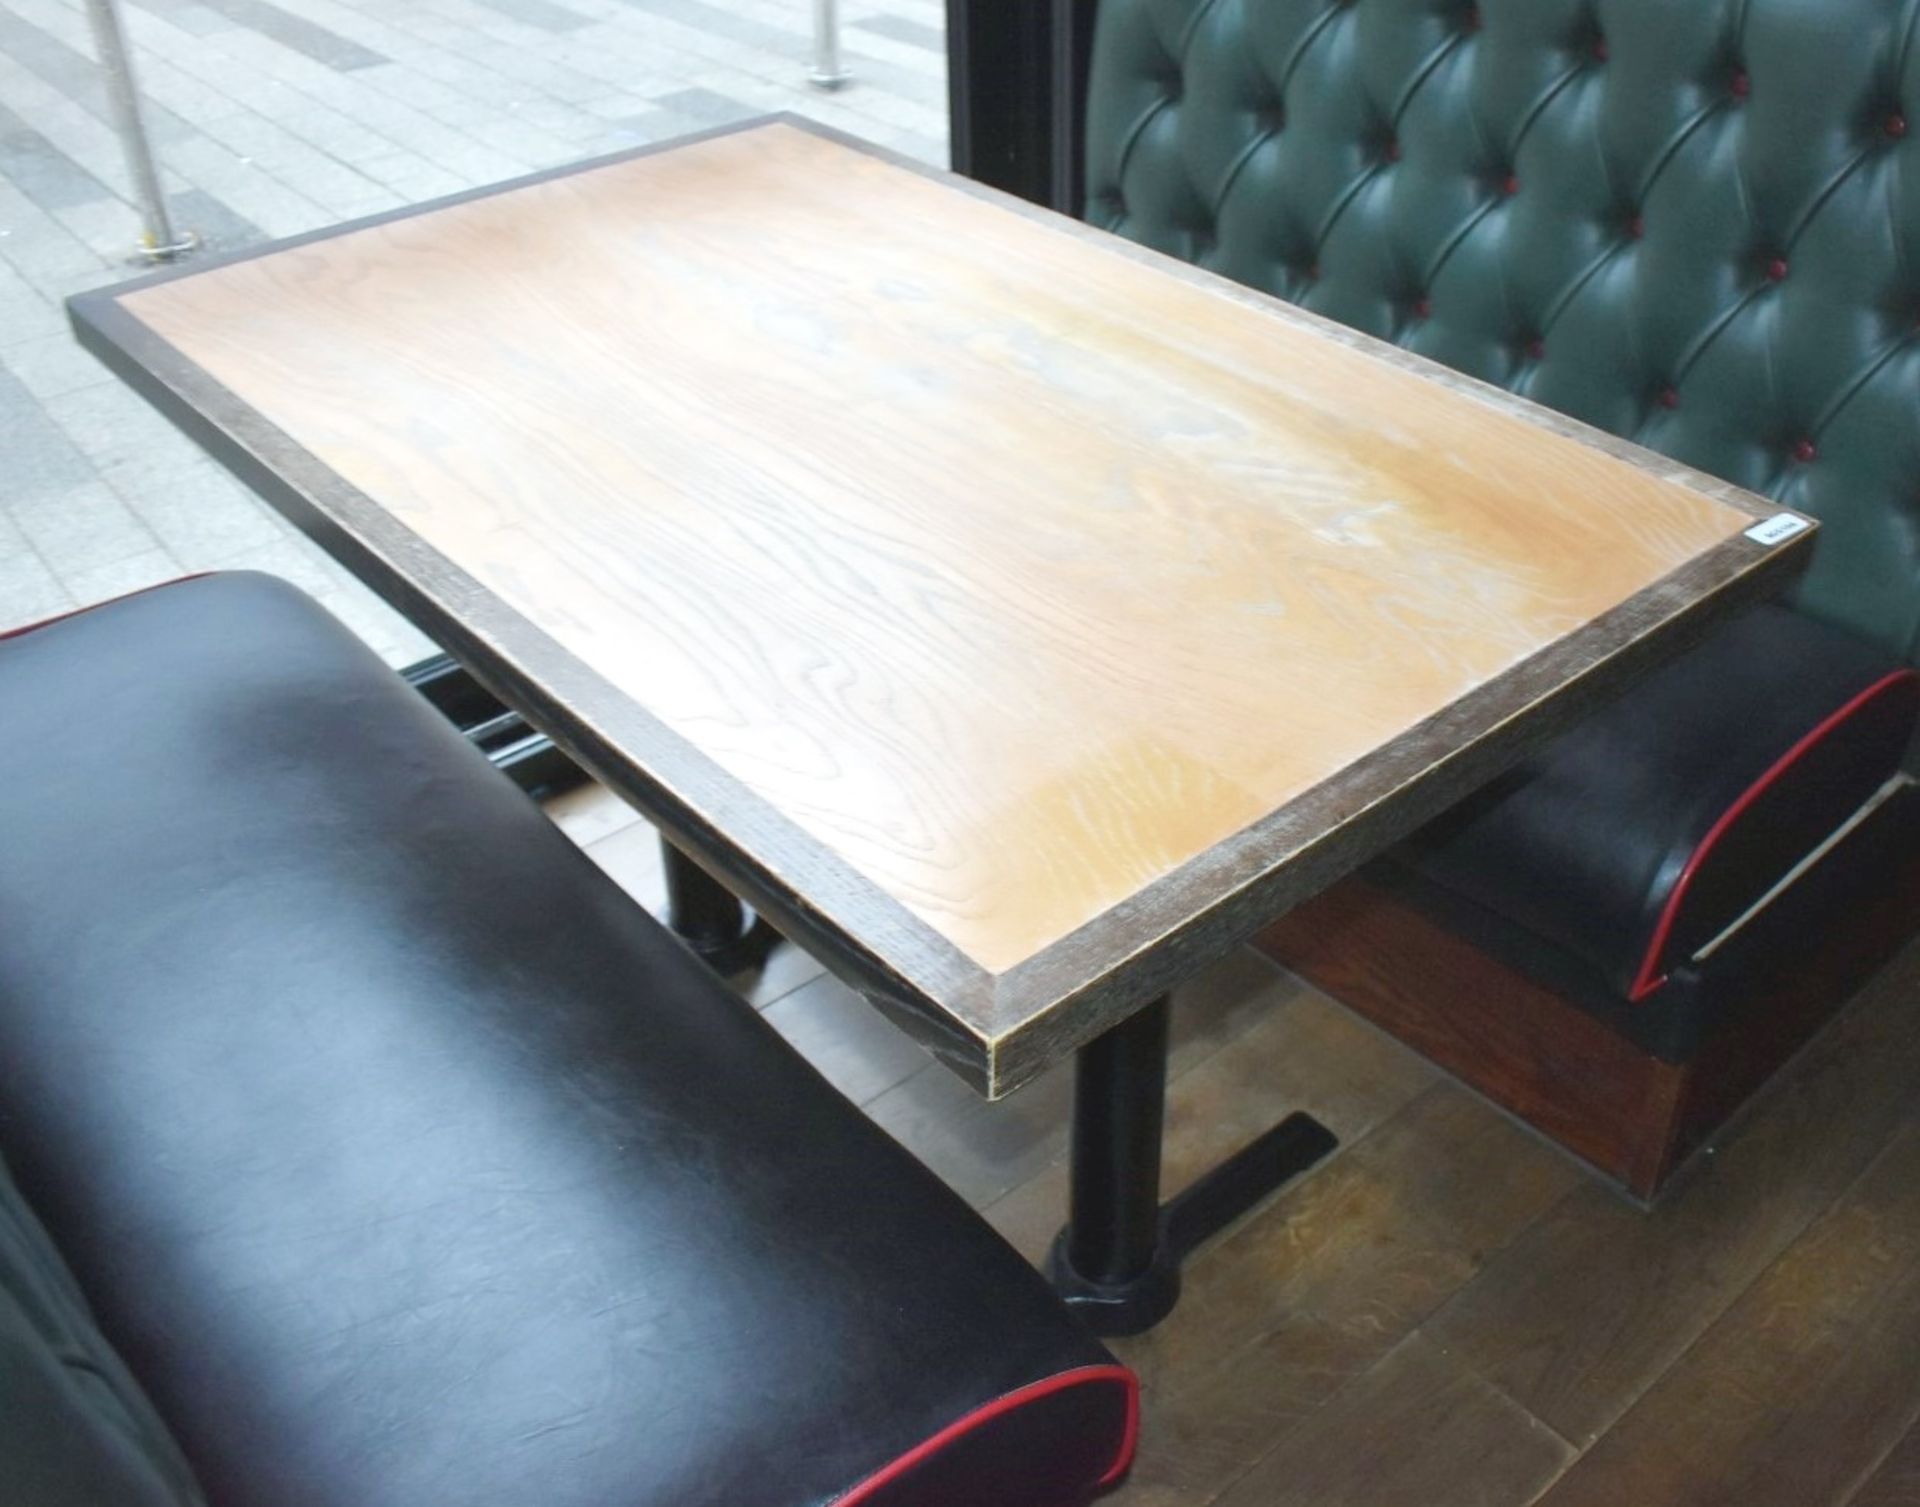 1 x Rectangular Restaurant Table - Seats Upto 4 Persons - Two Tone Wooden Top and Cast Iron Bases - Image 3 of 5